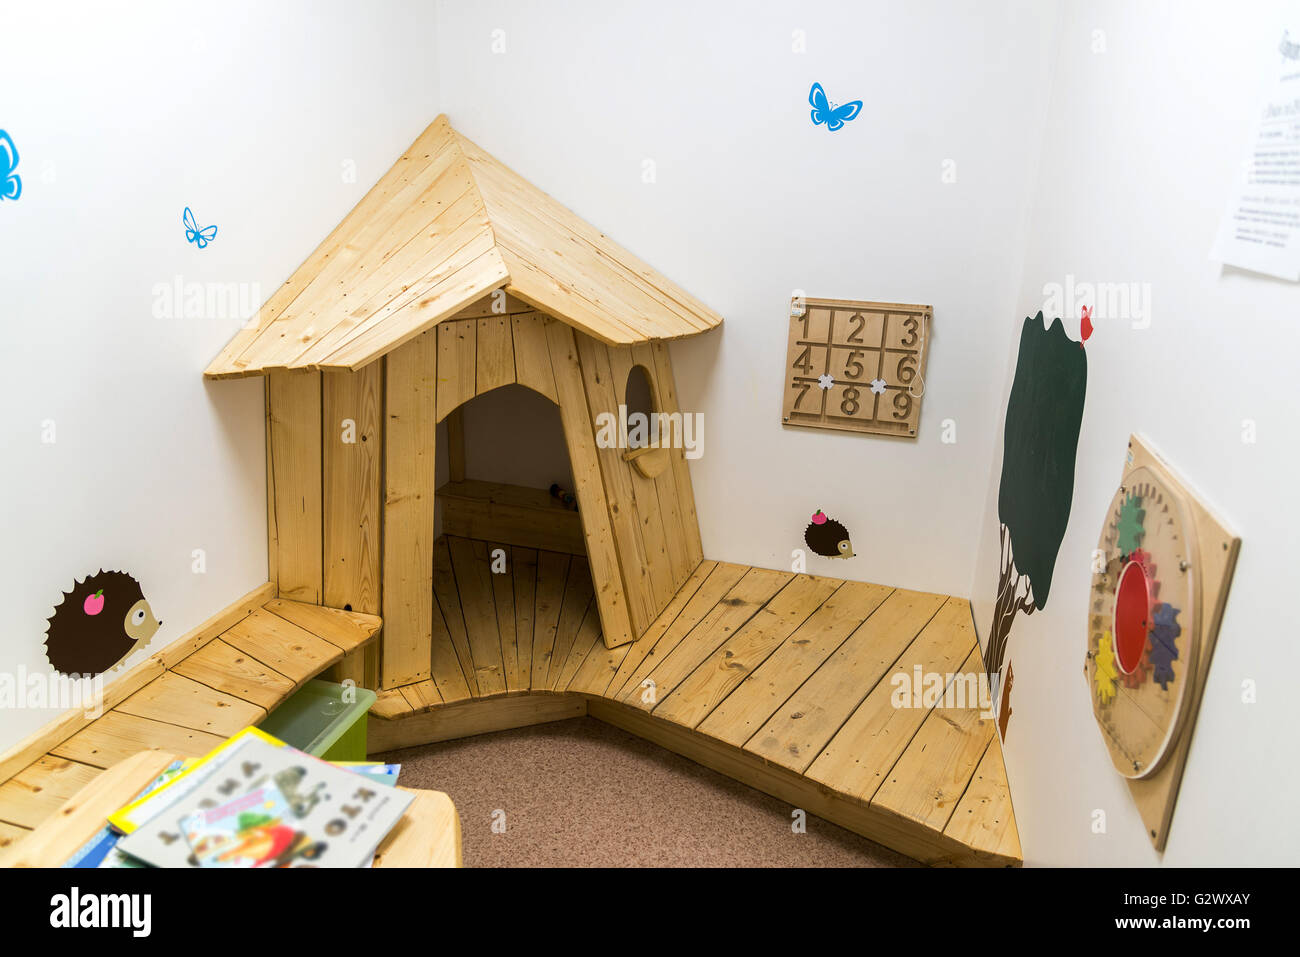 Children's playroom with house and educational toys Stock Photo